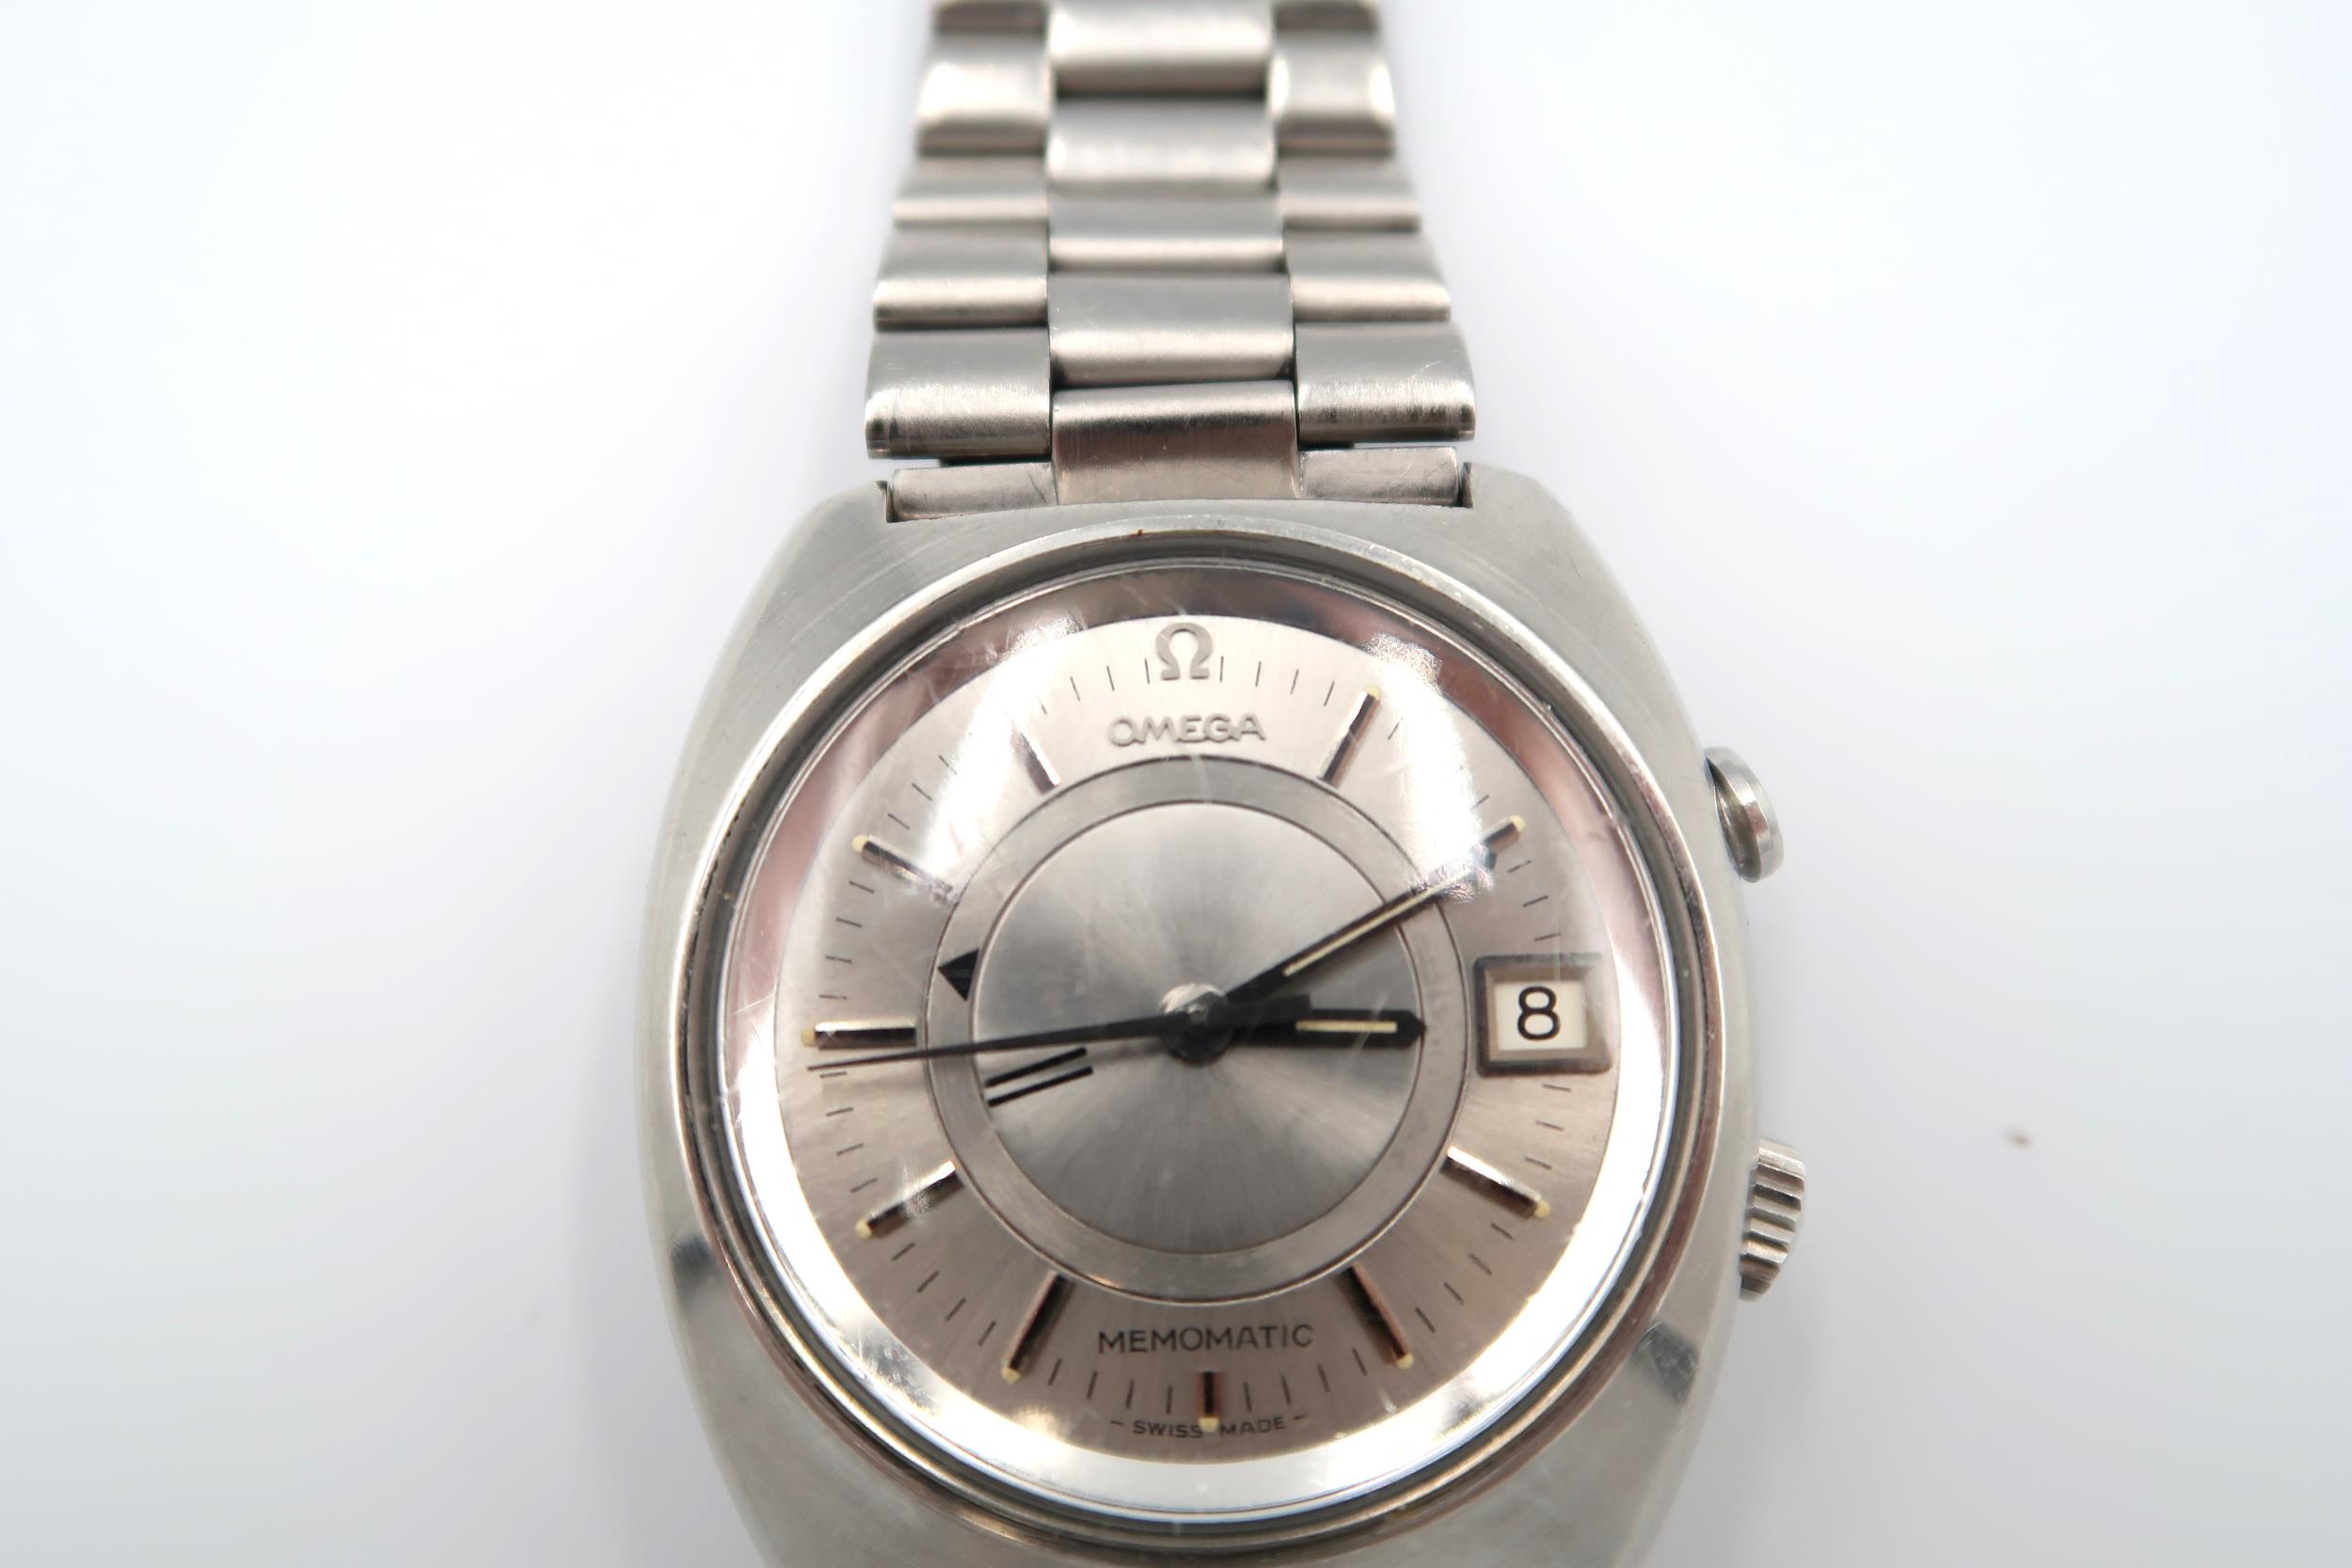 A gents Omega Seamaster Memomatic bracelet wristwatch, early 1970's - running in the saleroom - Image 2 of 3